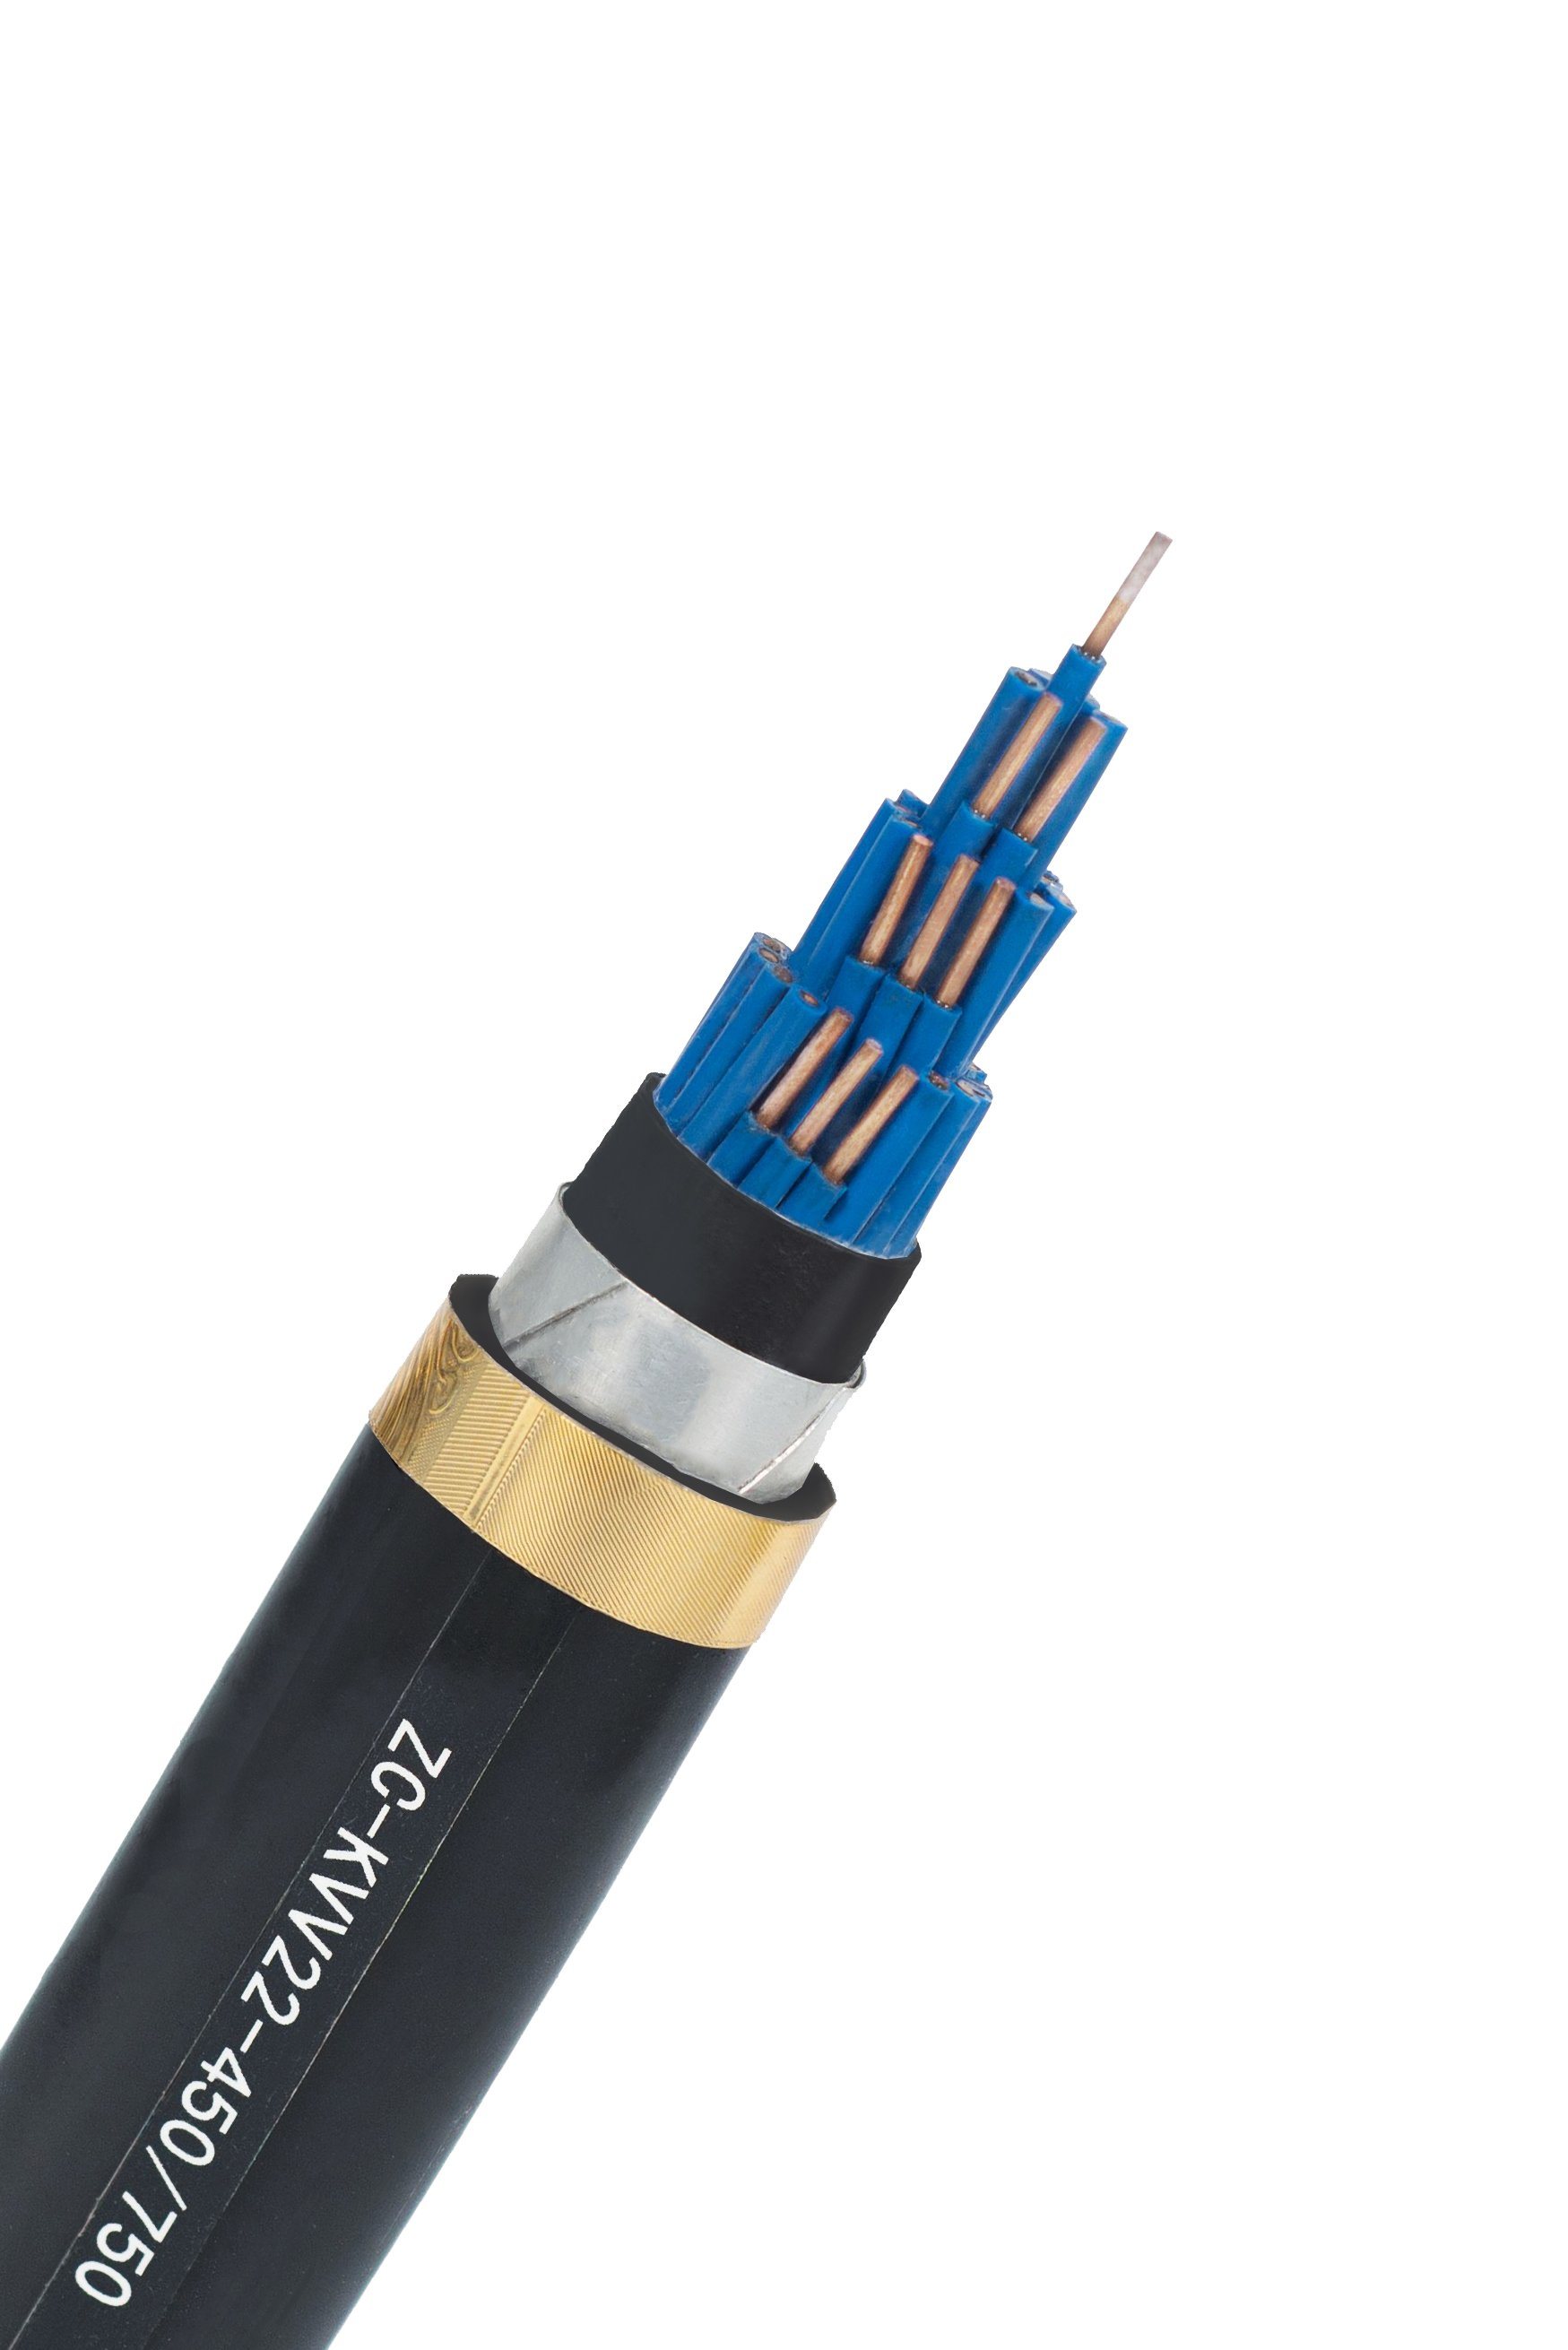 Fire Resistant 3 Cores PVC Insulated PVC Jacket Underground Overhead Electrical Cables Copper Conductor Electric Wire Power Cable with Good Price